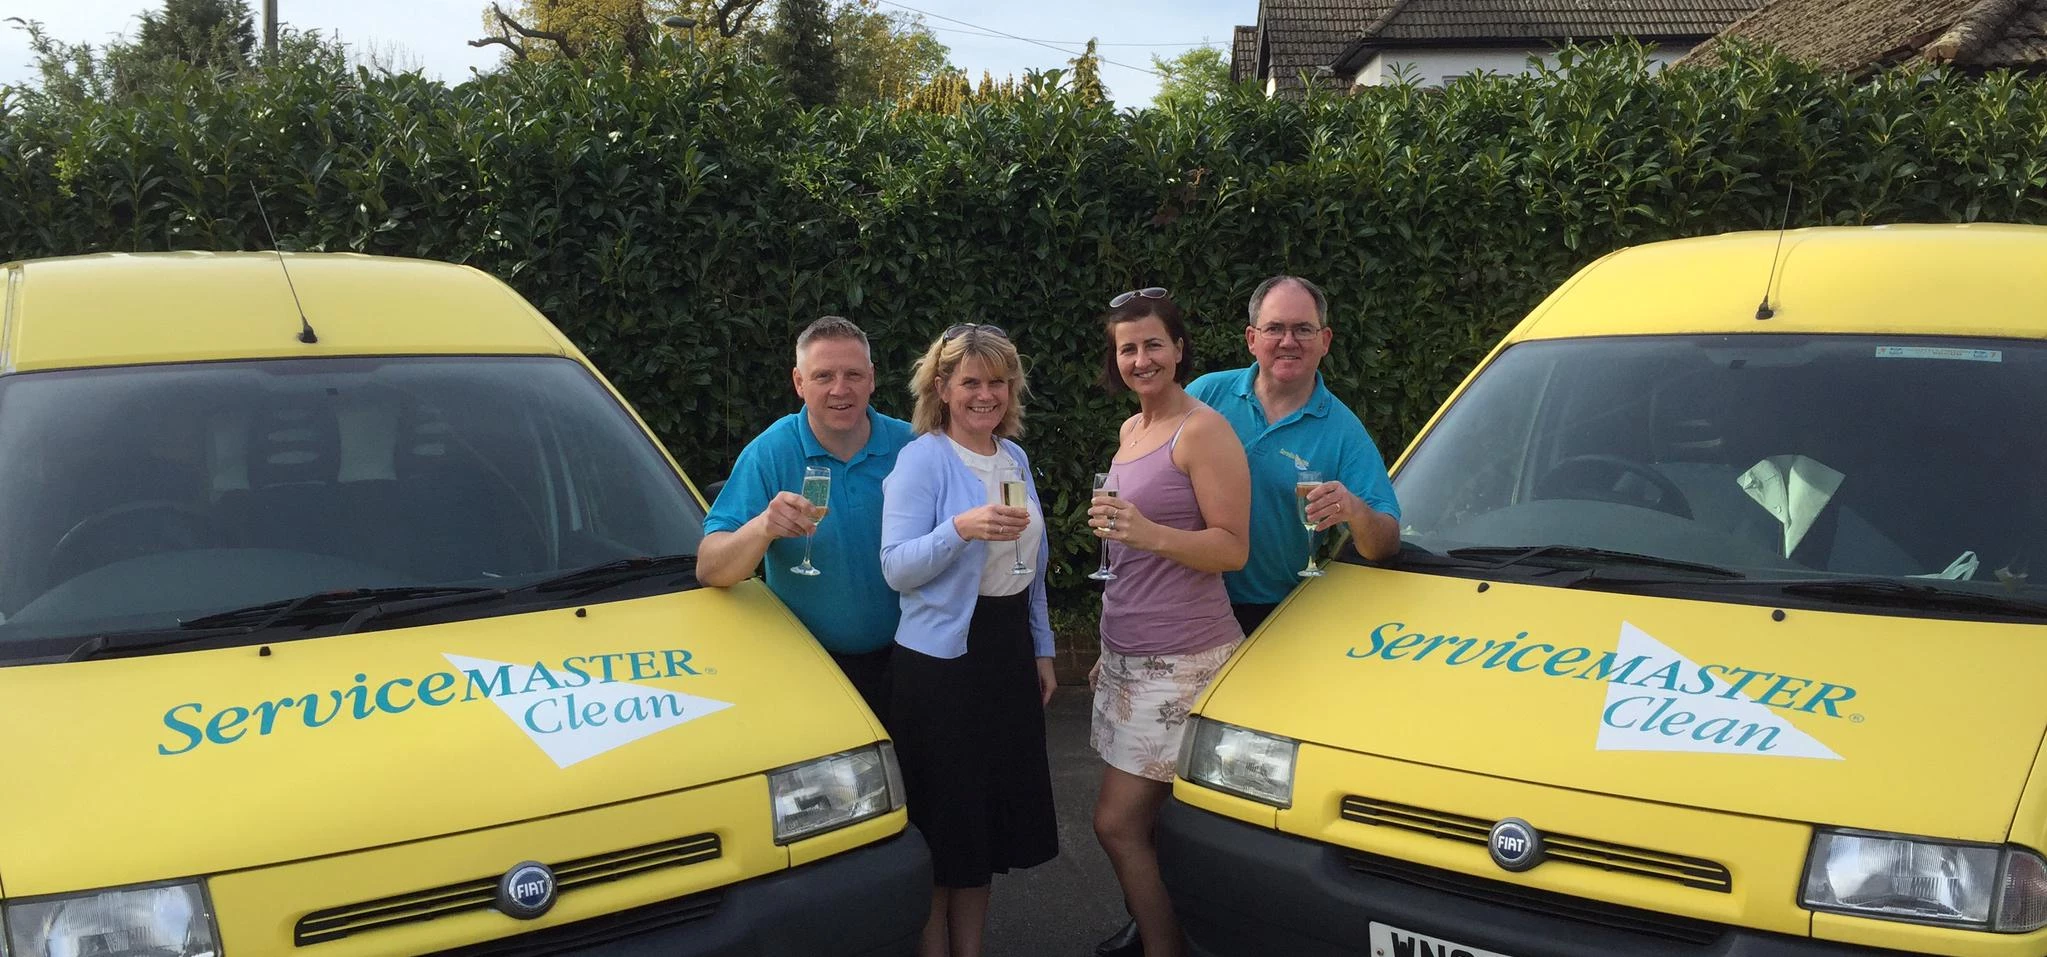 Celebrations! (L-R) Darren and Alison Perry & Sue and Andrew Ashenden, all ServiceMaster Clean Redhi